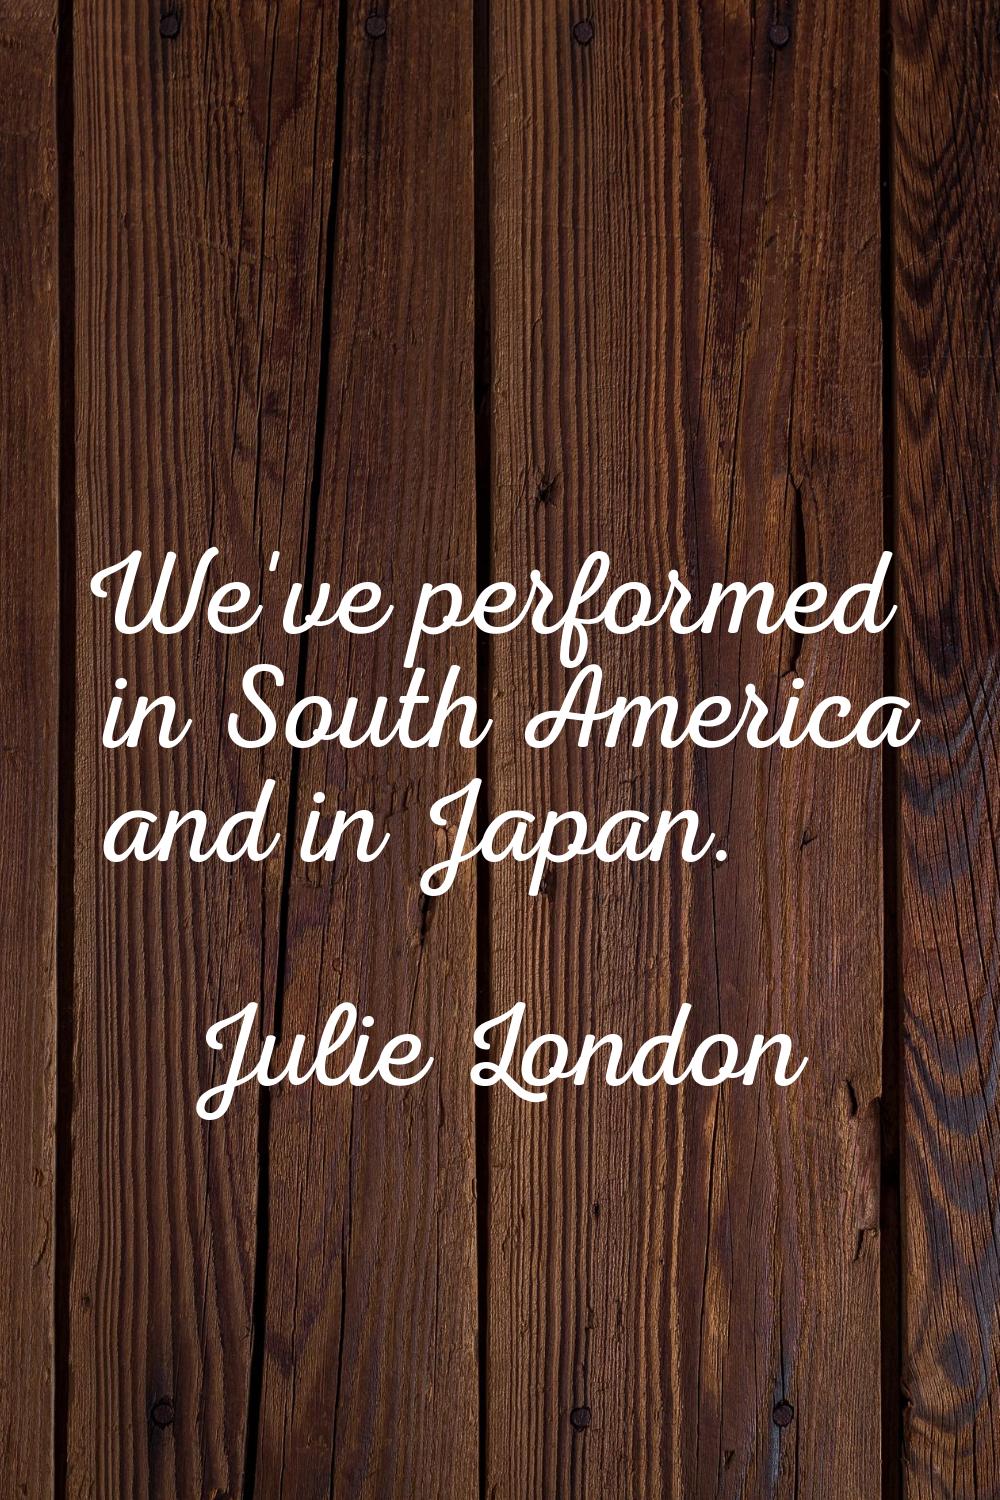 We've performed in South America and in Japan.